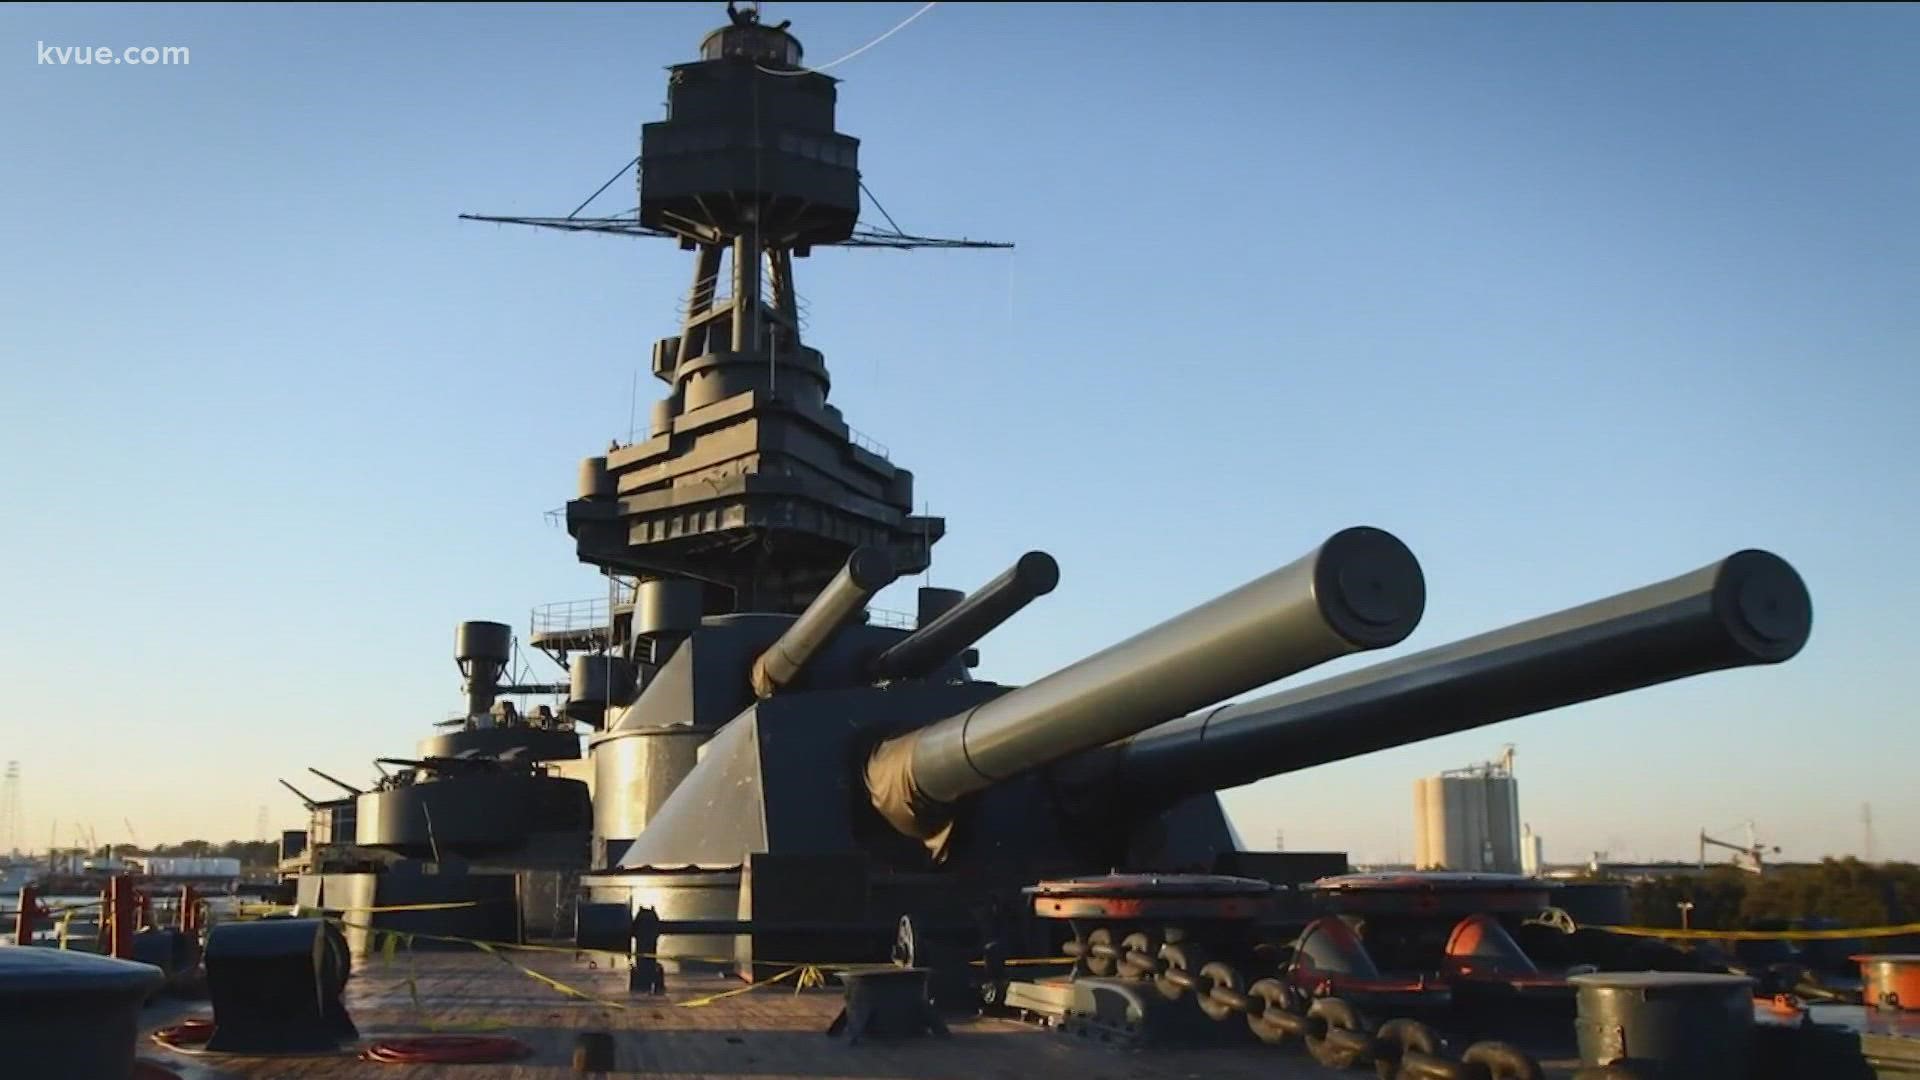 It's one of the icons of Texas and for decades has been one of the state's biggest tourist attractions. But changes are coming soon for Battleship Texas.